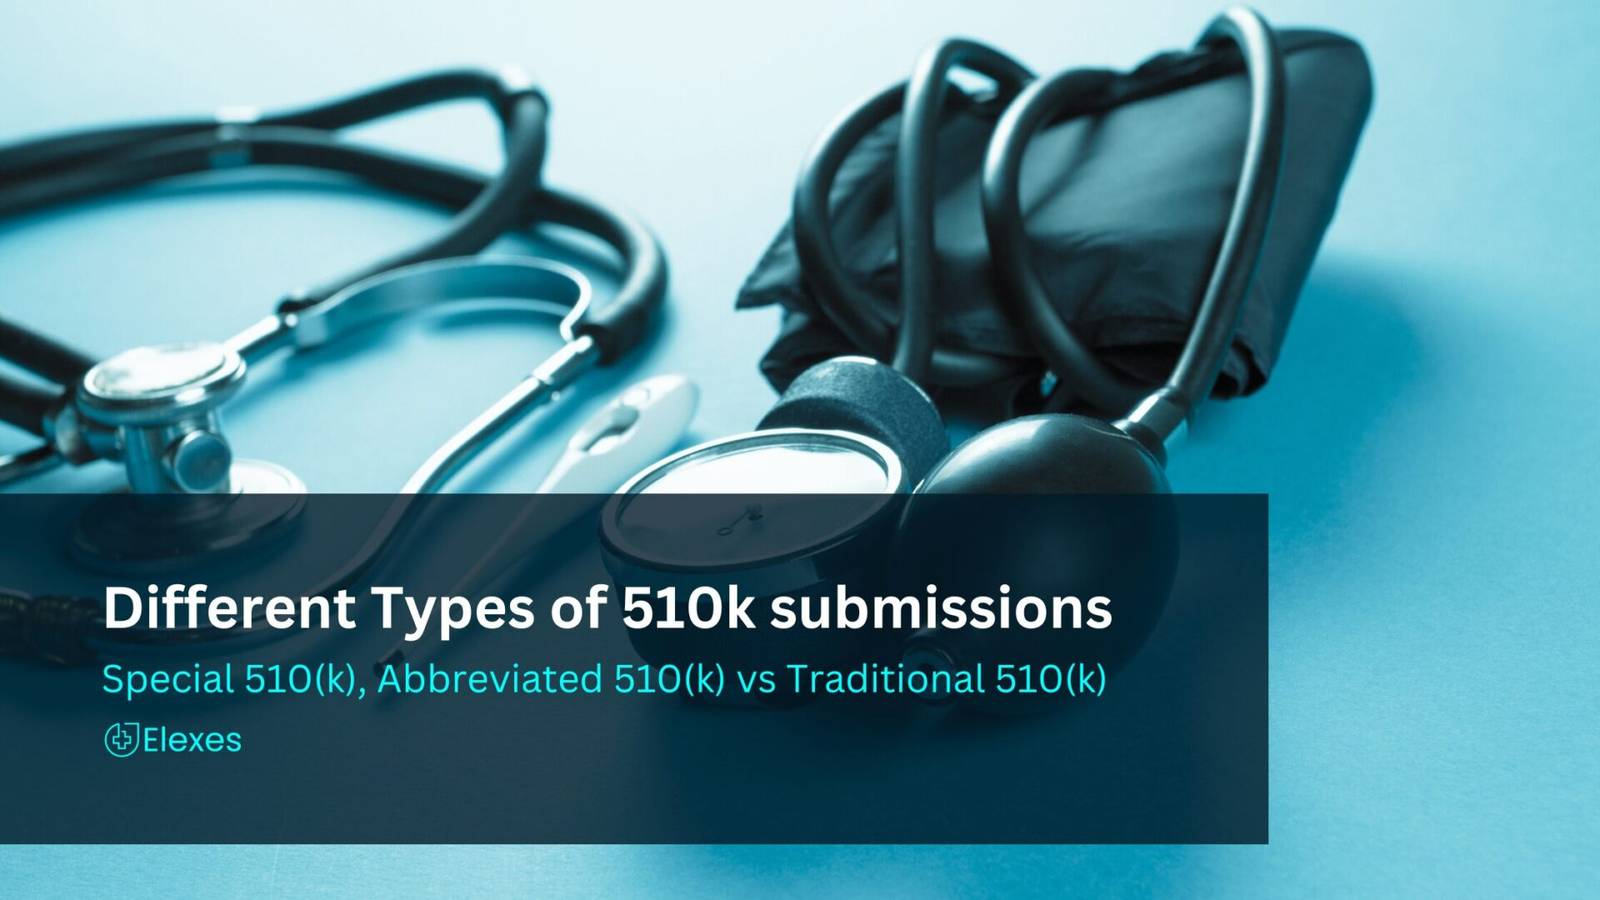 Different types of 510k submissions | Special, Abbreviated vs Traditional 510(k)